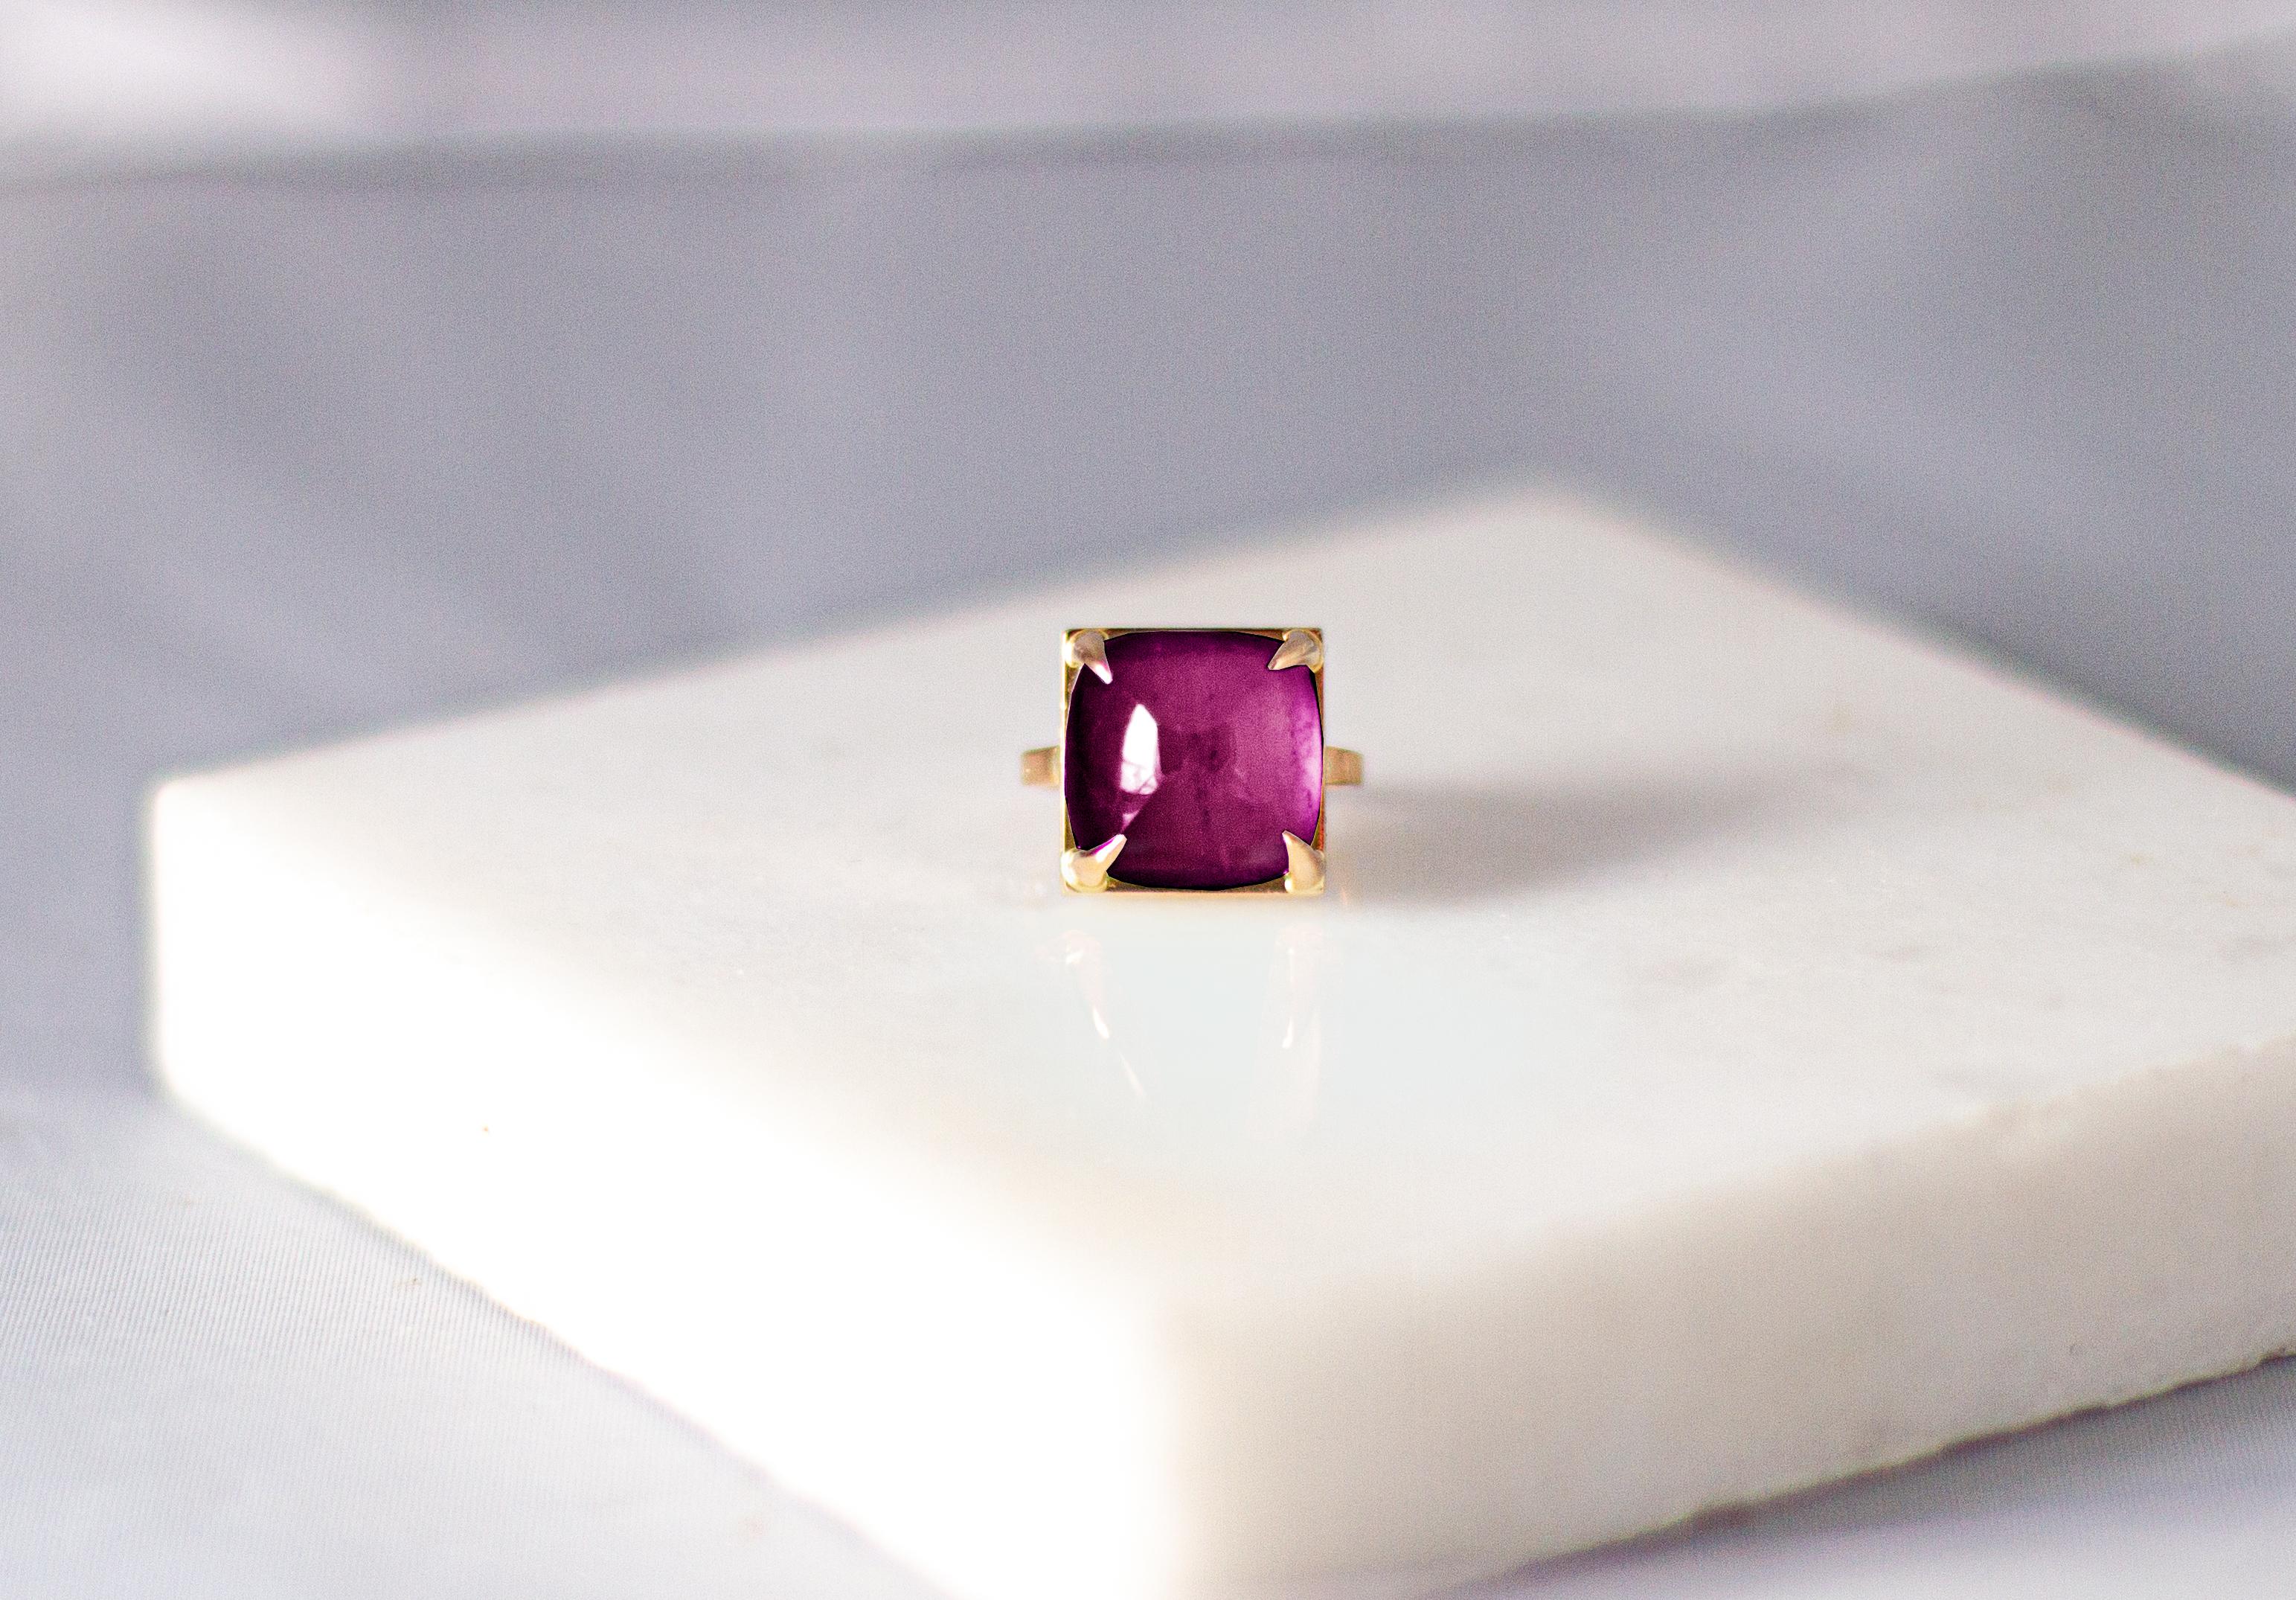 This engagement ring is made of 18 karat rose gold and sugarloaf natural pink tourmaline (14,7 mm/ 0,55 inches). 

When for most of the gem it works the way: the smaller prongs the better. This is the shape and size of the gem that we really enjoy